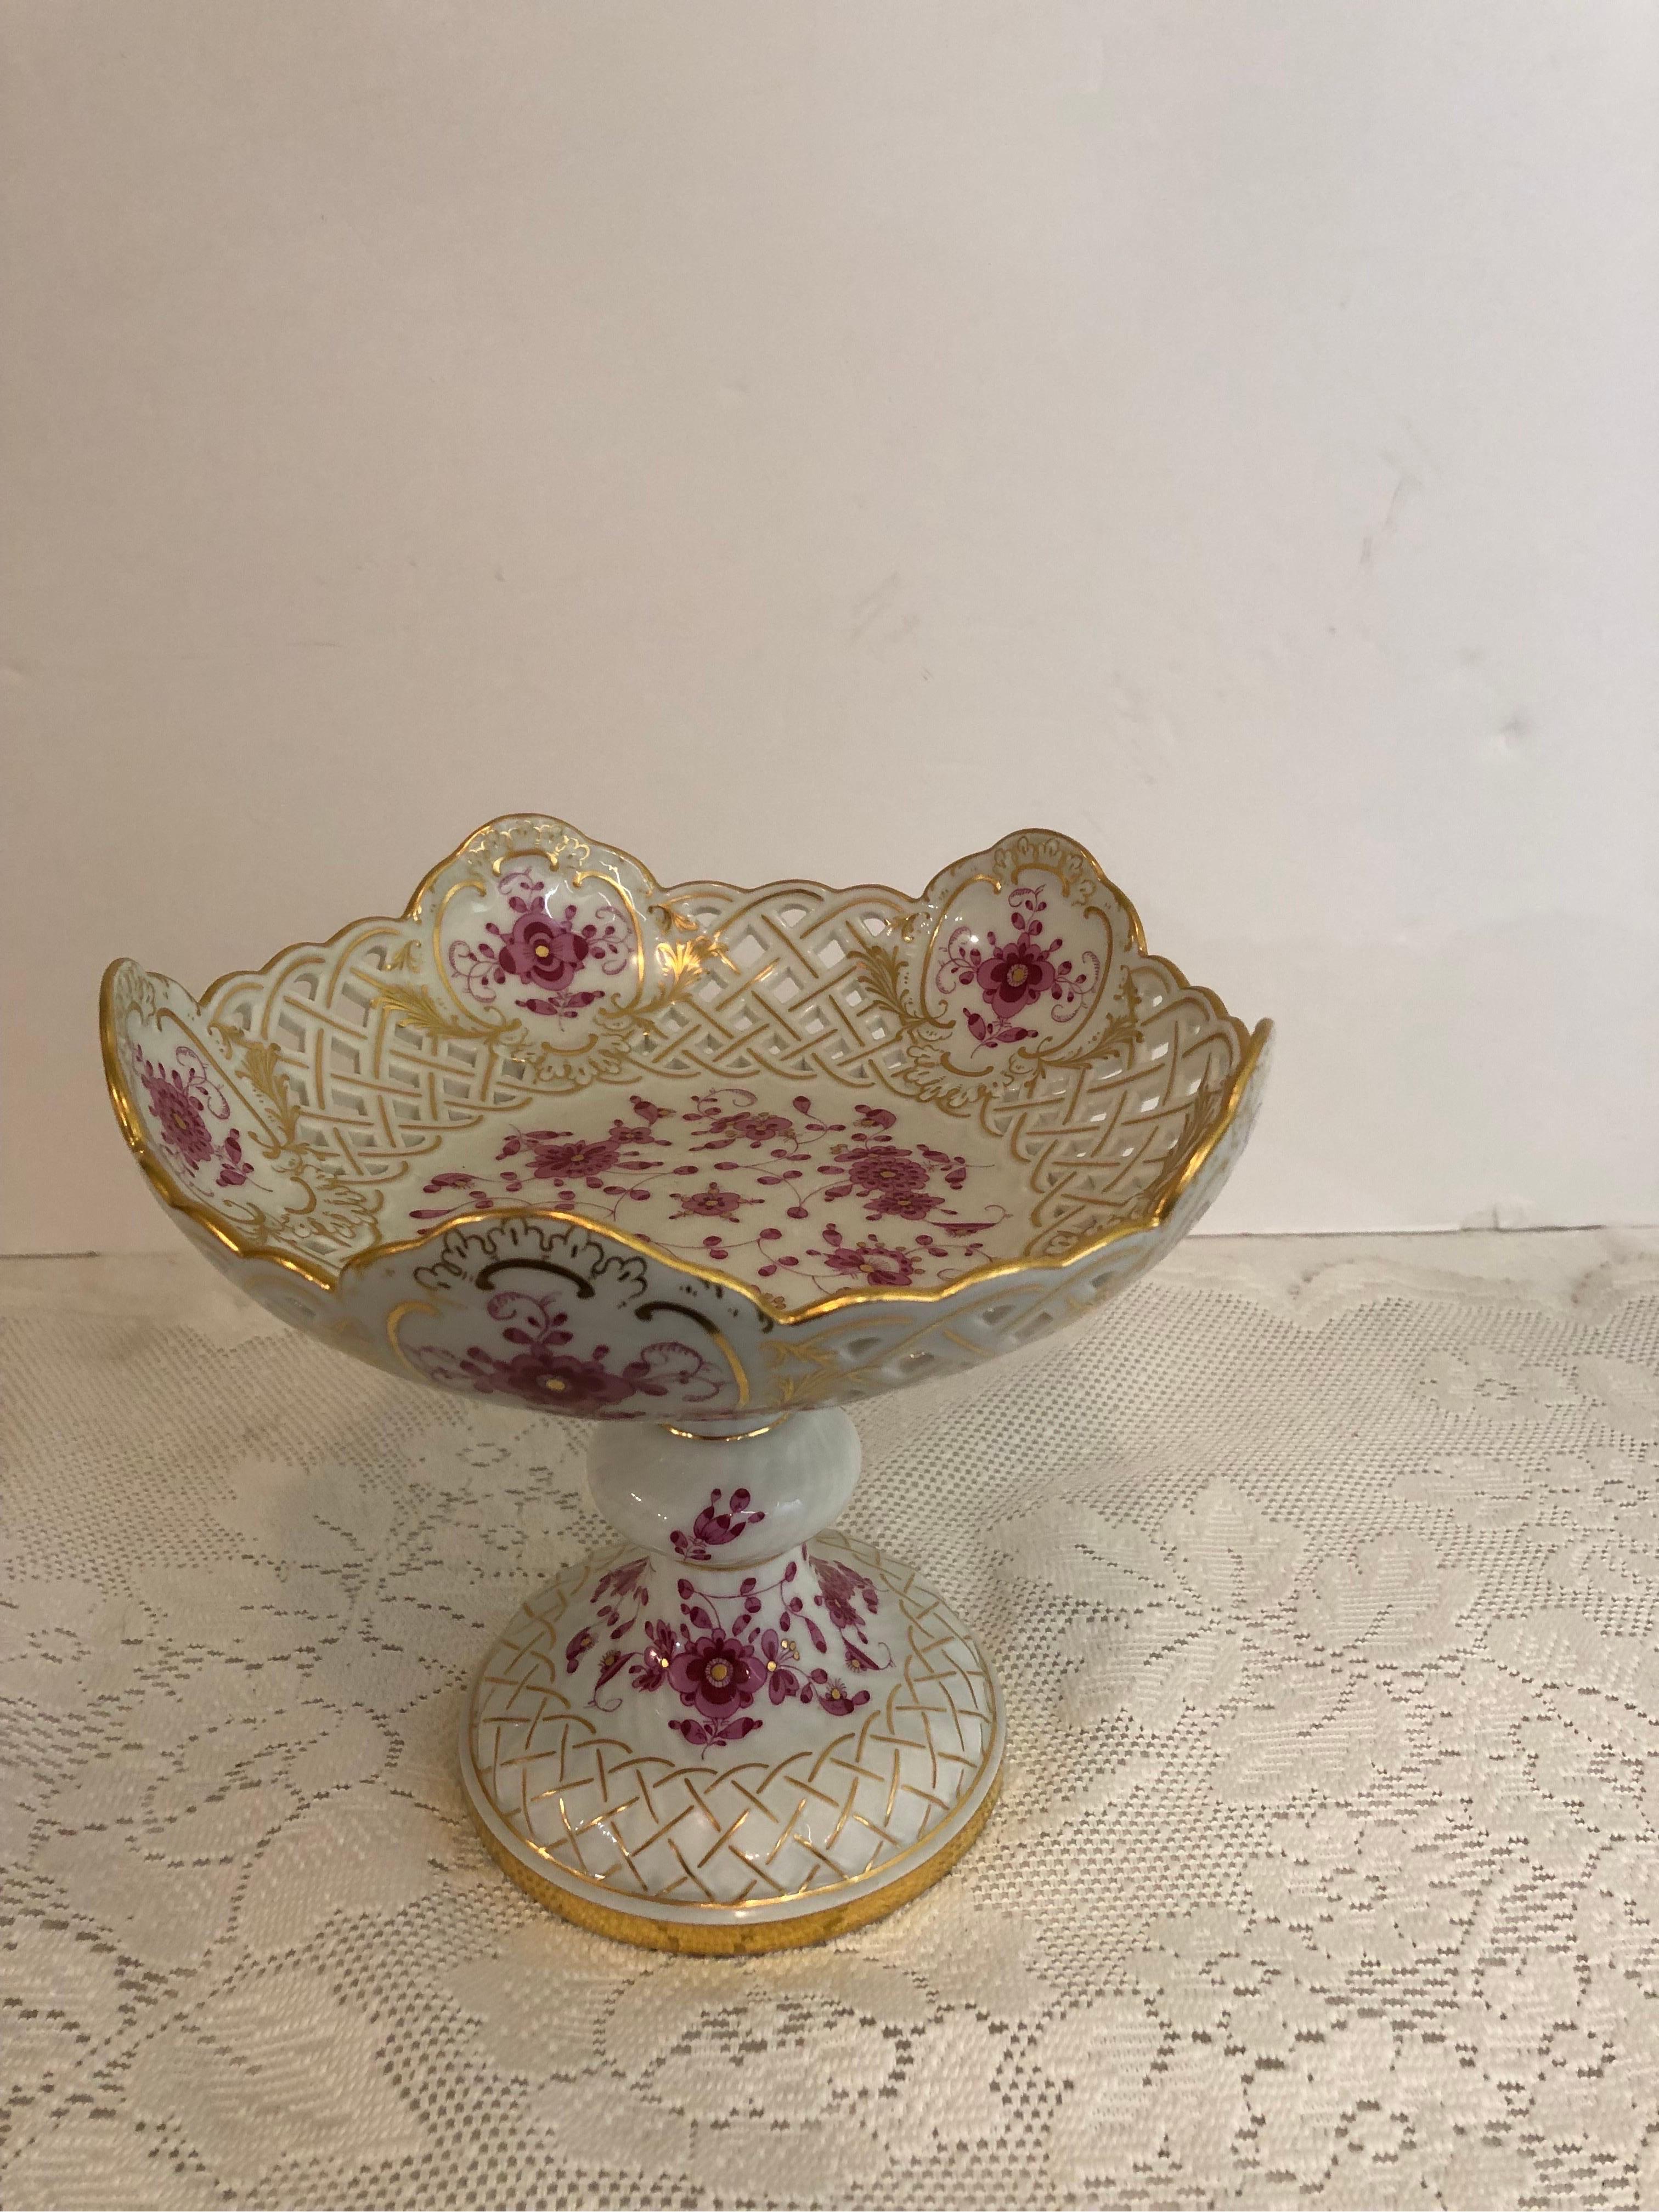 Porcelain Meissen Purple Indian Reticulated Compote with Pink, Puce and Gold Decoration